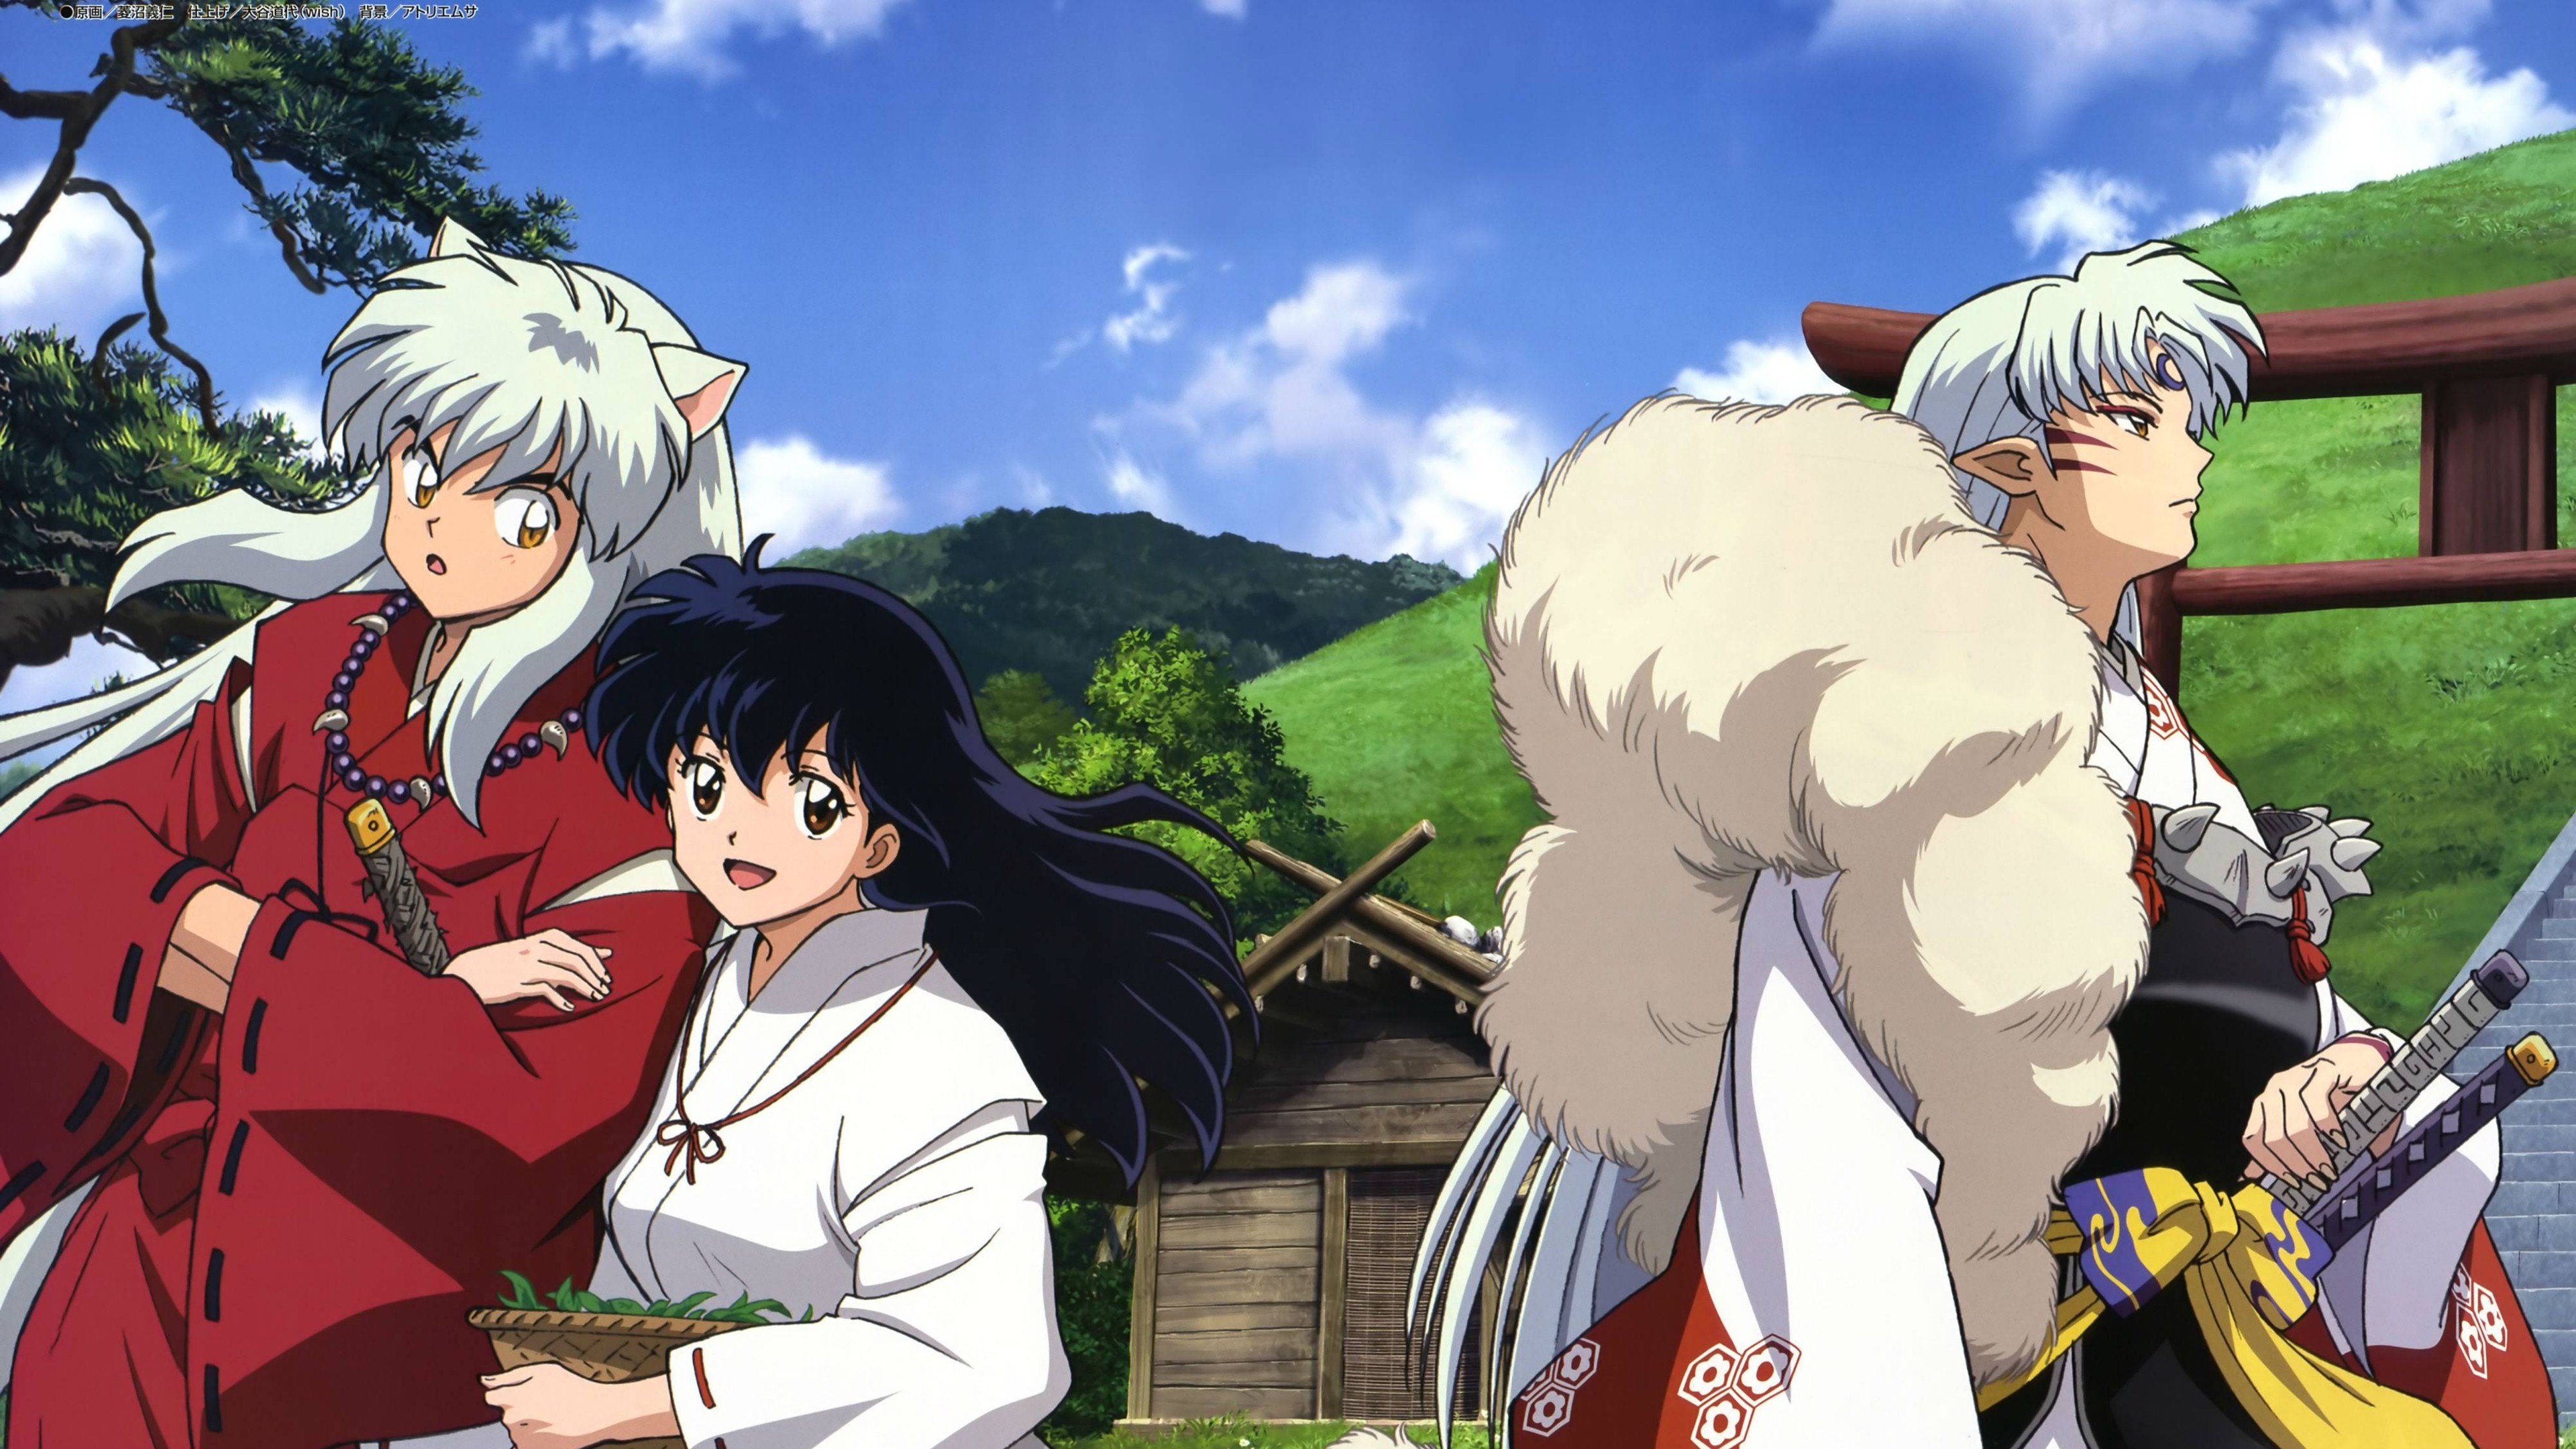 Kagome and InuYasha, Anime couple, Iconic love story, Adventure and danger, 3840x2160 4K Desktop